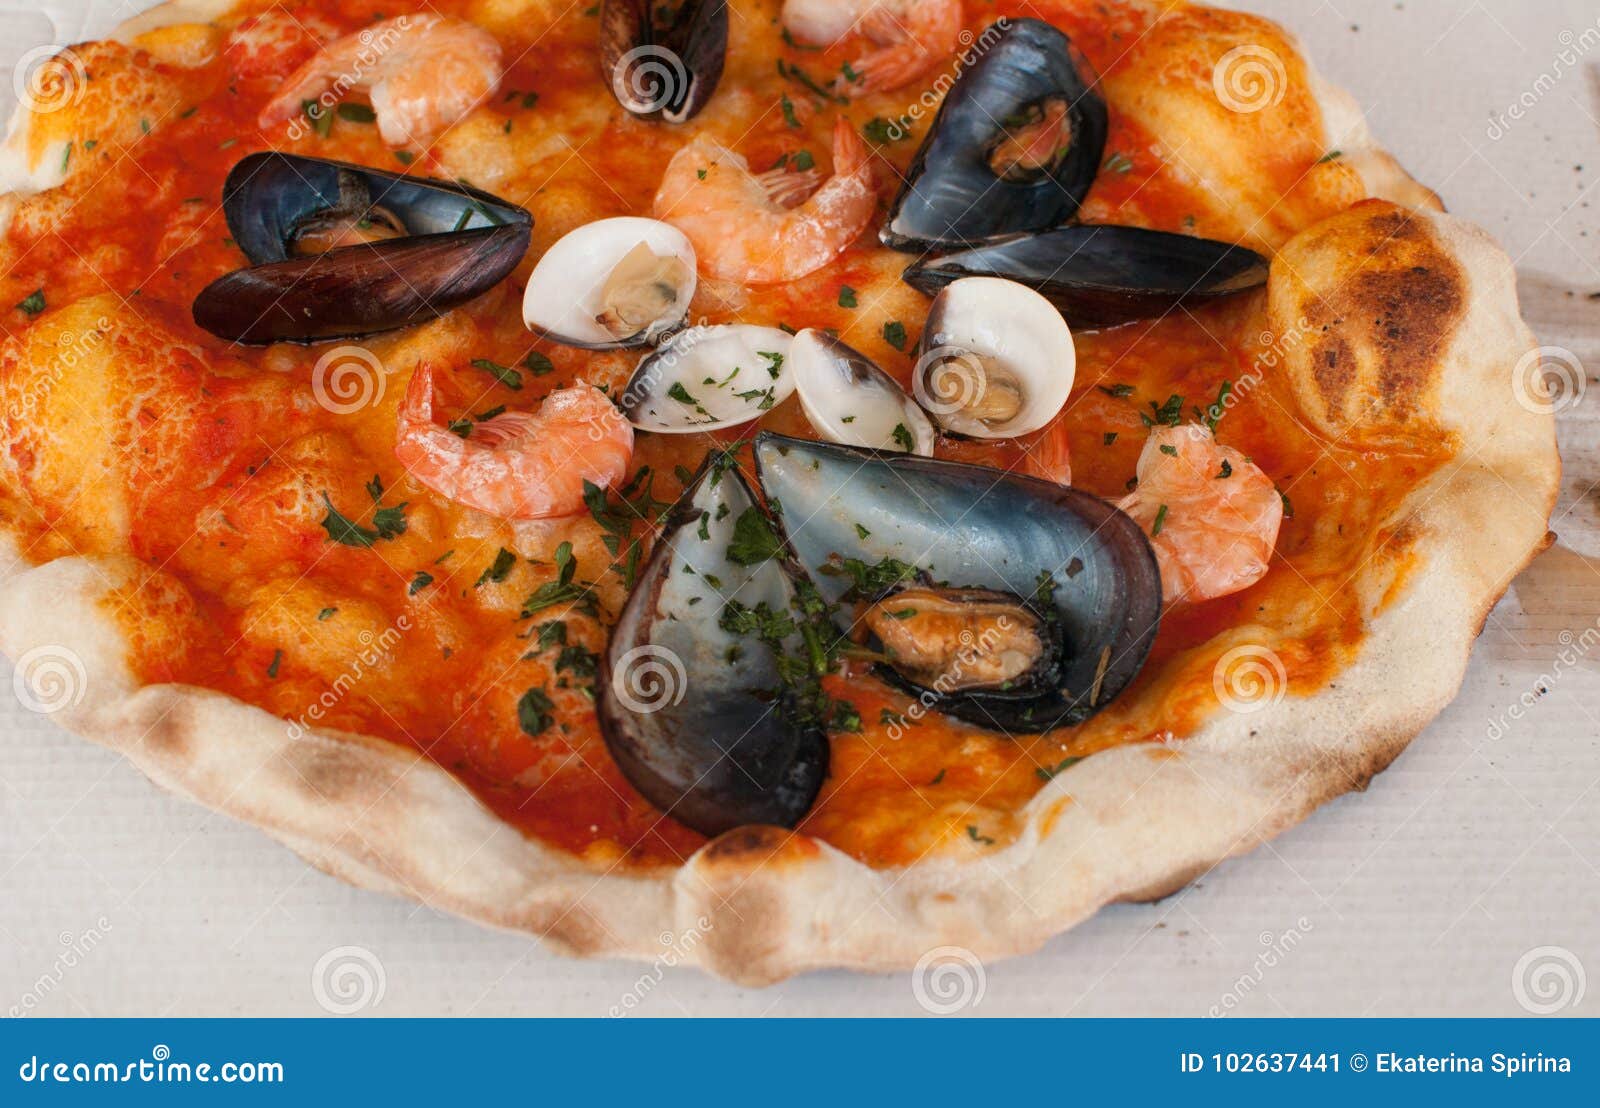 pizza frutti di mare with shrimps, open clams and mussels and basilic